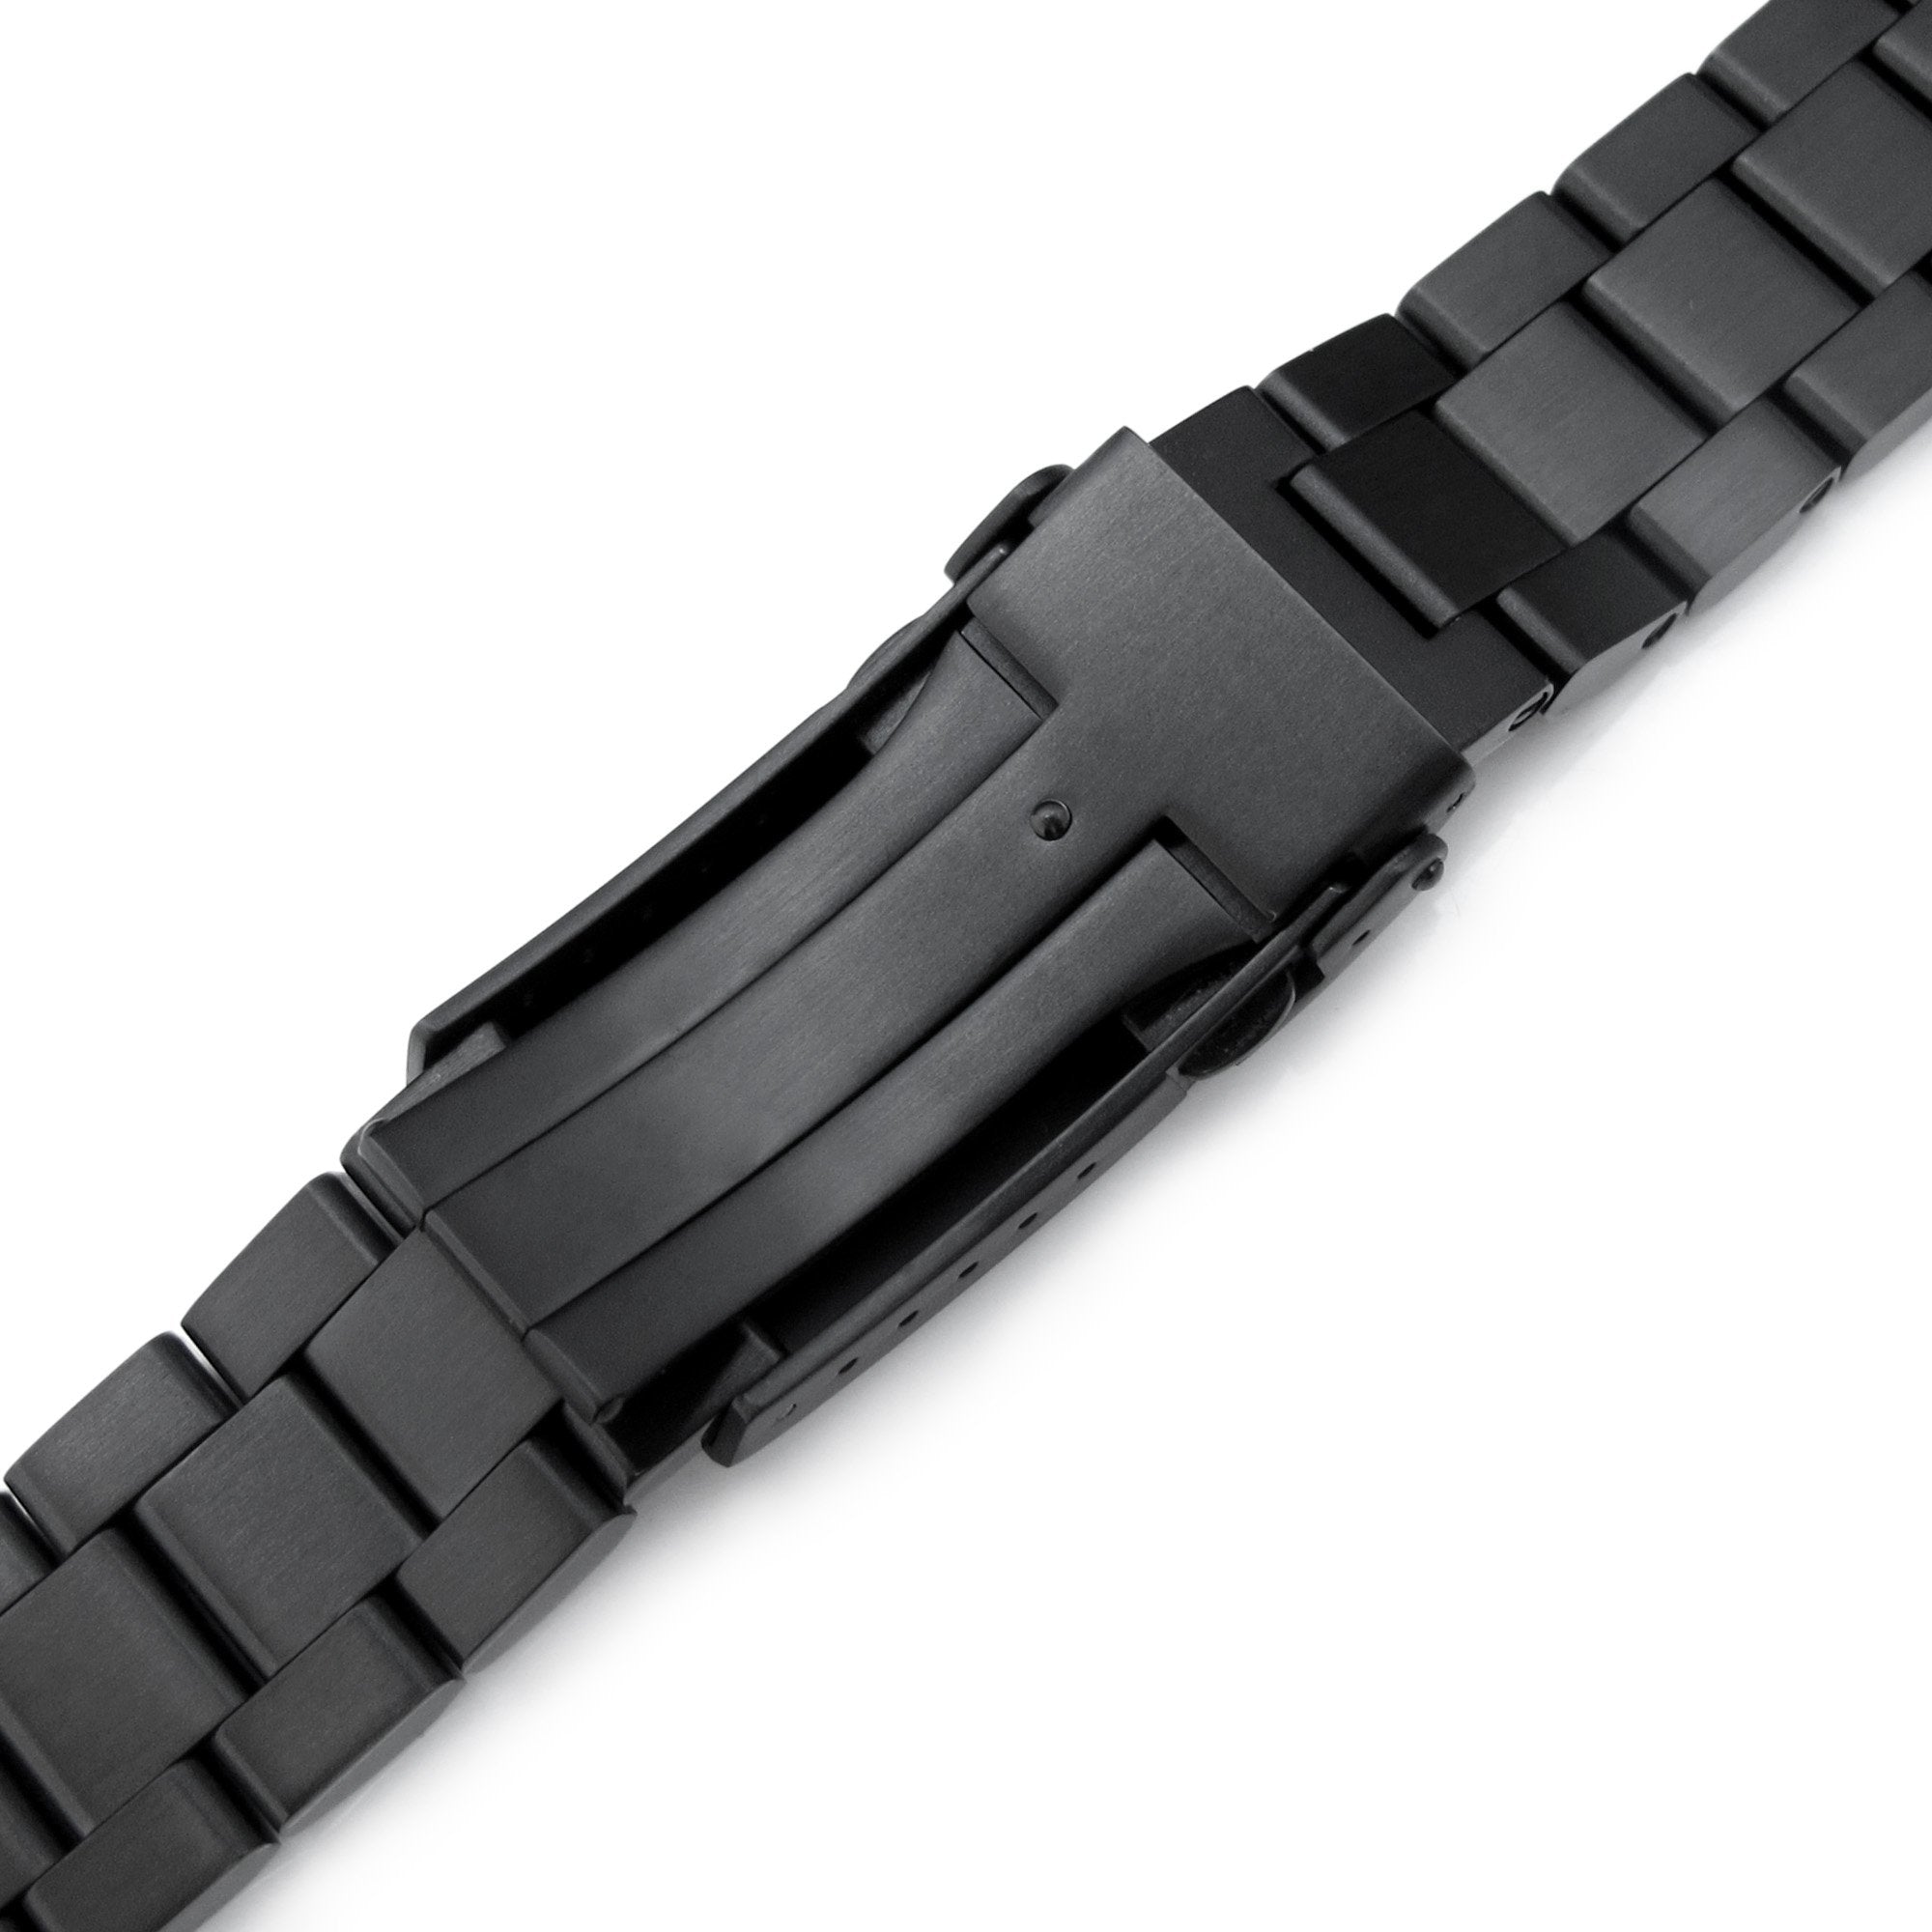 20mm Hexad 316L Stainless Steel Watch Band for Seiko Sumo SBDC001, Diamond-like Carbon (DLC Black) V-Clasp Strapcode Watch Bands